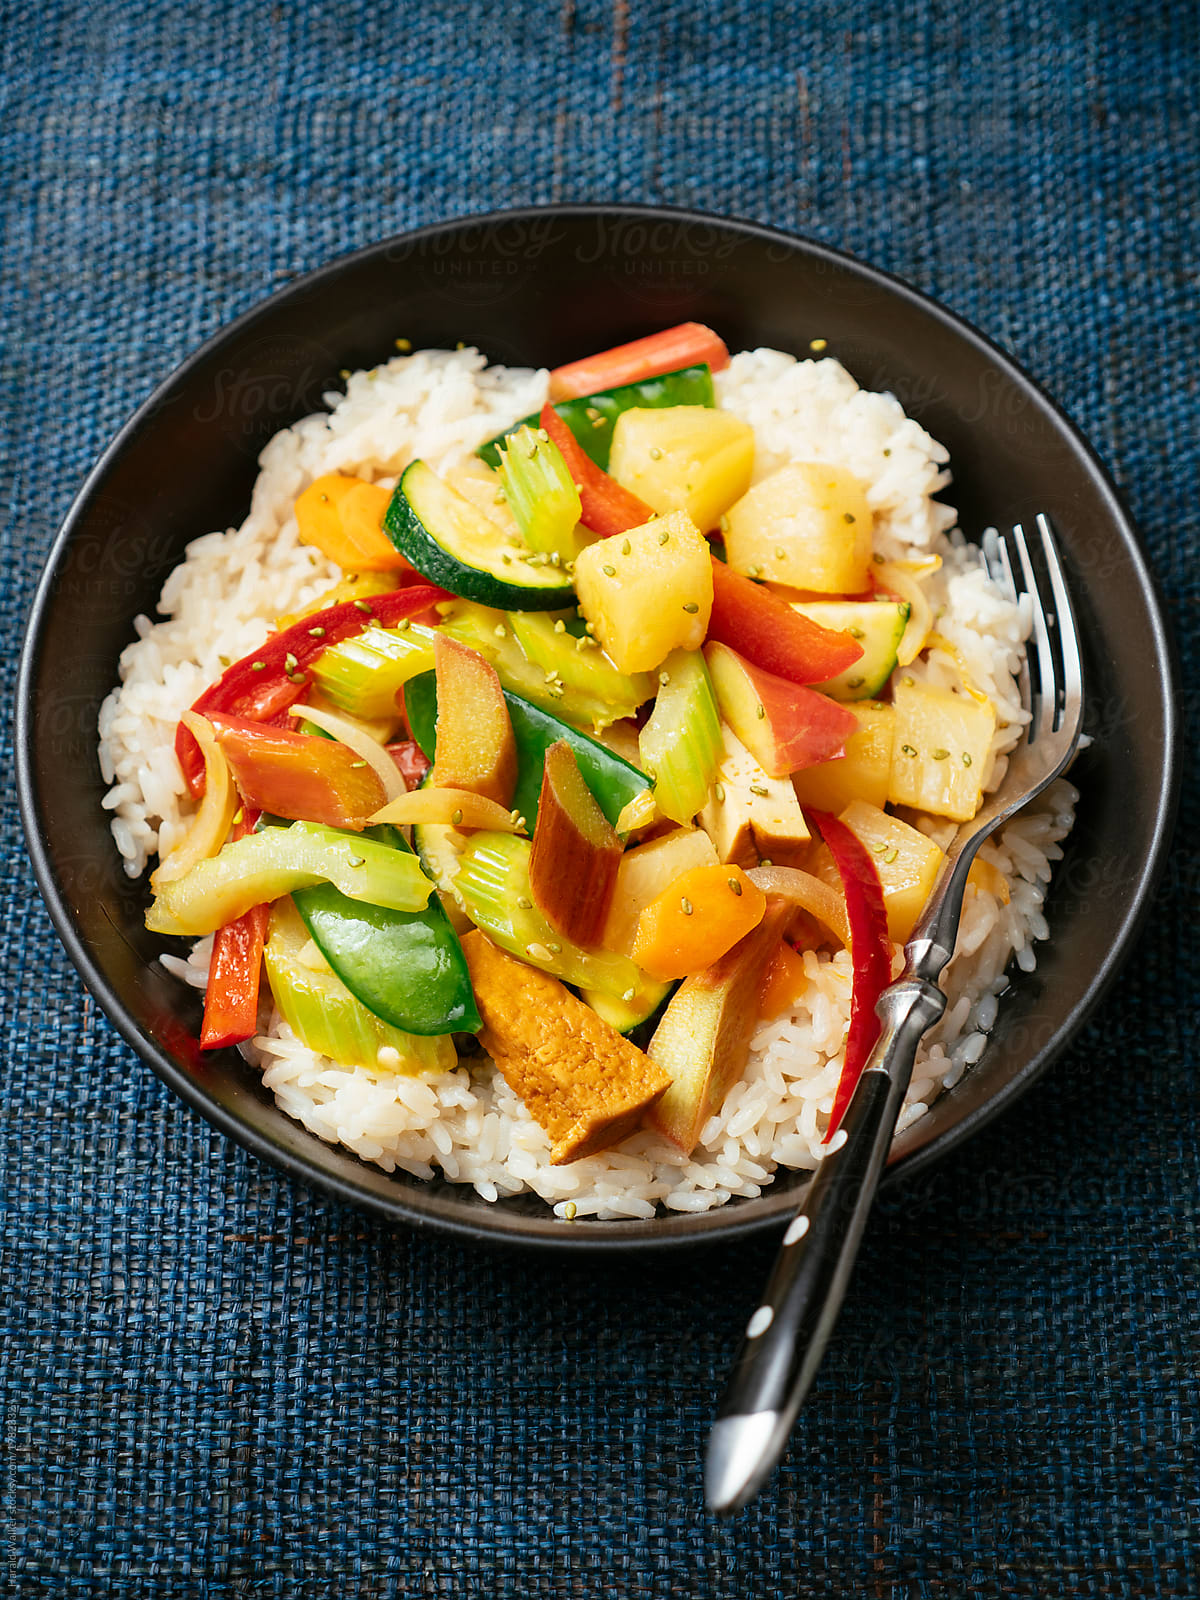 Sweet Sour Vegetables with Rhubarb, Pineapple and Tofu